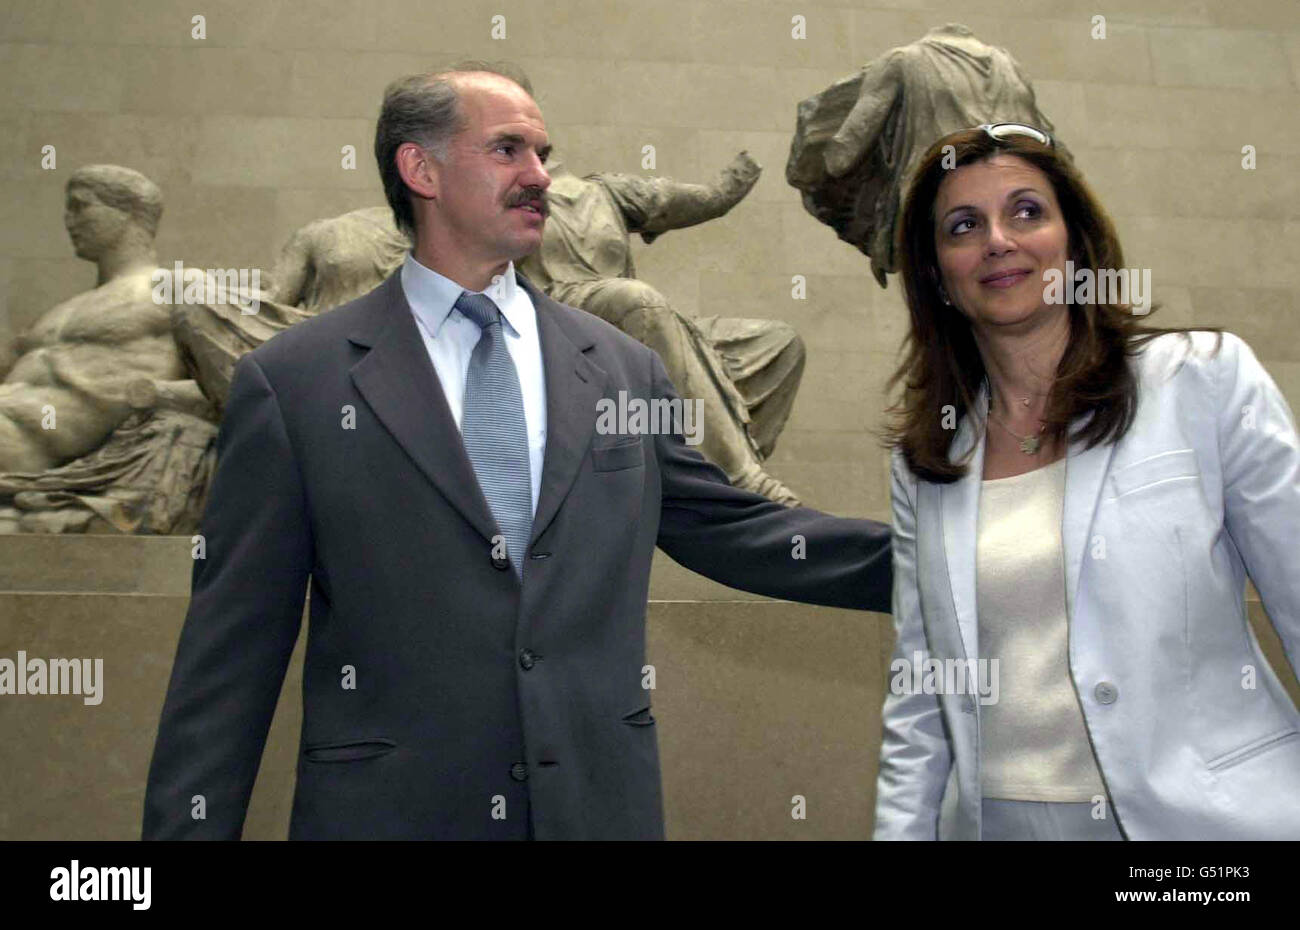 Greek Foreign Minister George Papendreou with his wife Andain the British Museum where he expressed hope that a more positive dialogue could begin with the British Government over the future of the Elgin Marbles. * The Marbles were removed from the Parthenon in Athens by Lord Elgin and taken to the British Museum in 1817. Their ownership has always caused controversy and Greek ministers are pressing strongly for their return. Stock Photo